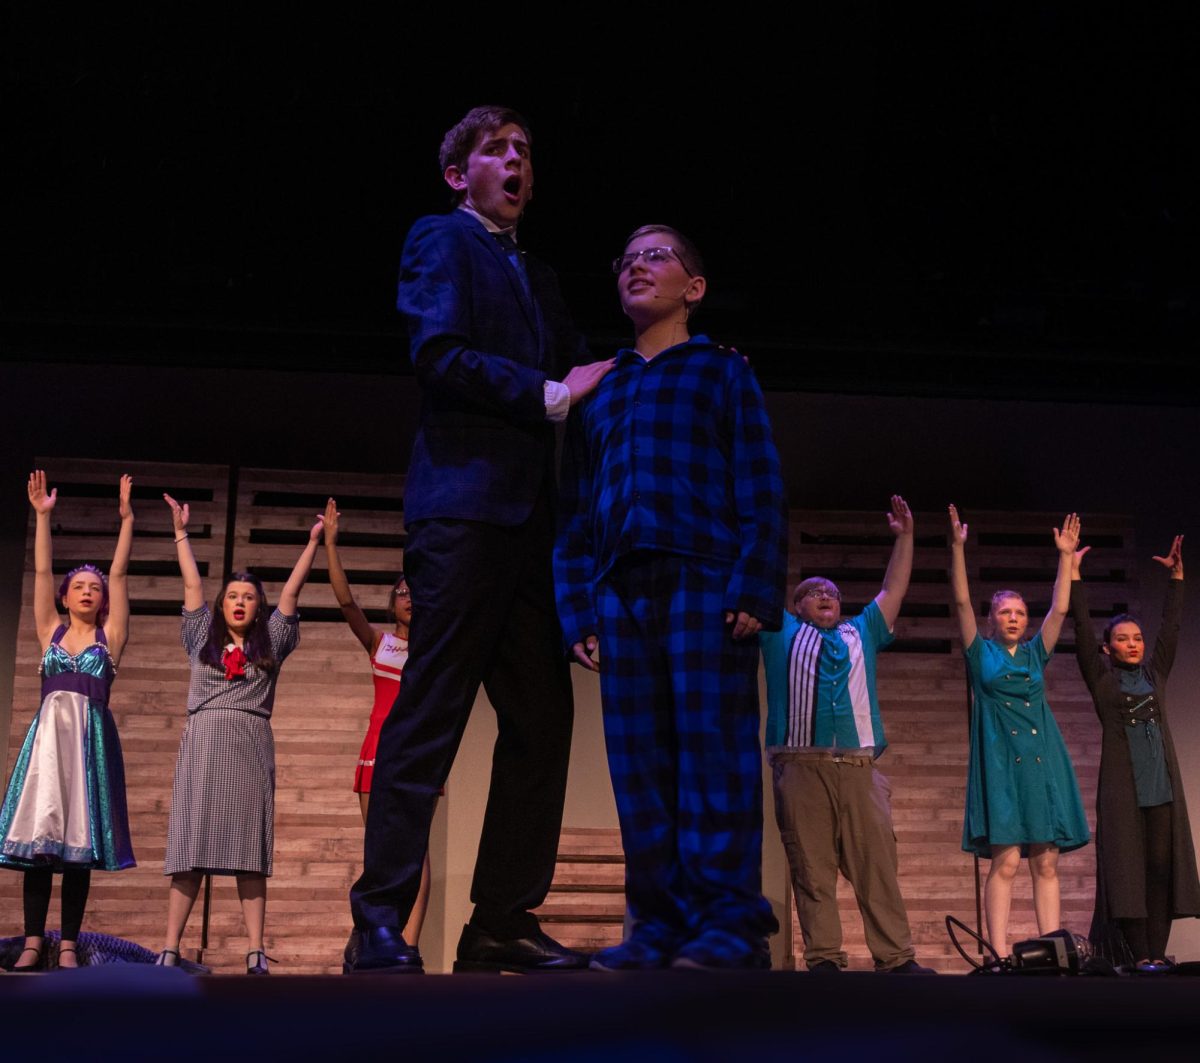 At the end of the opening scene of “Big Fish”, junior Connor Becker and middle school student Kyle Baumann, stand under the glowing lights. The cast stands behind in the final pose of the song. 
